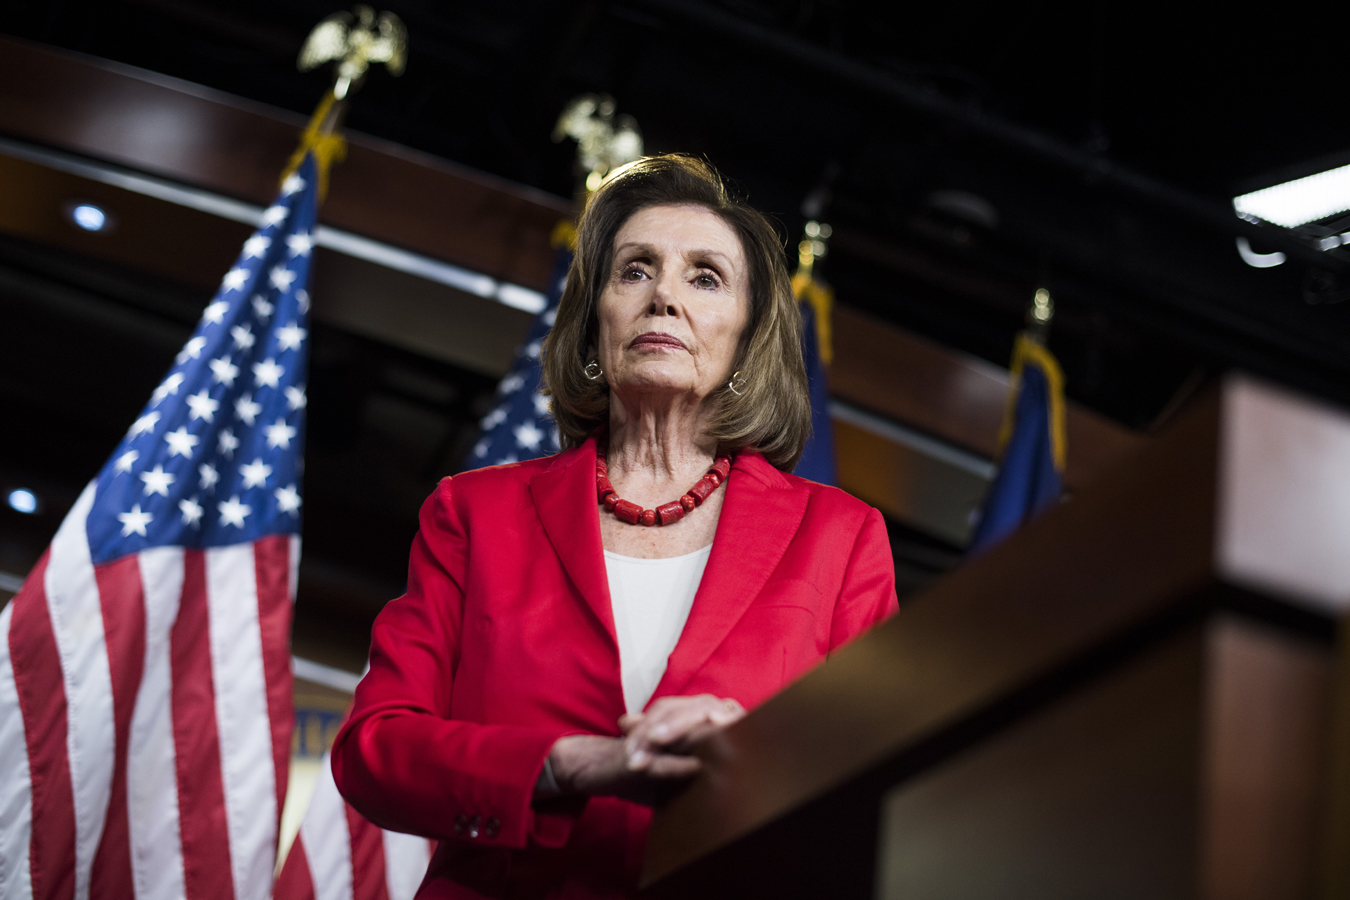 An image of Nancy Pelosi standing at a podium wearing a red blazer